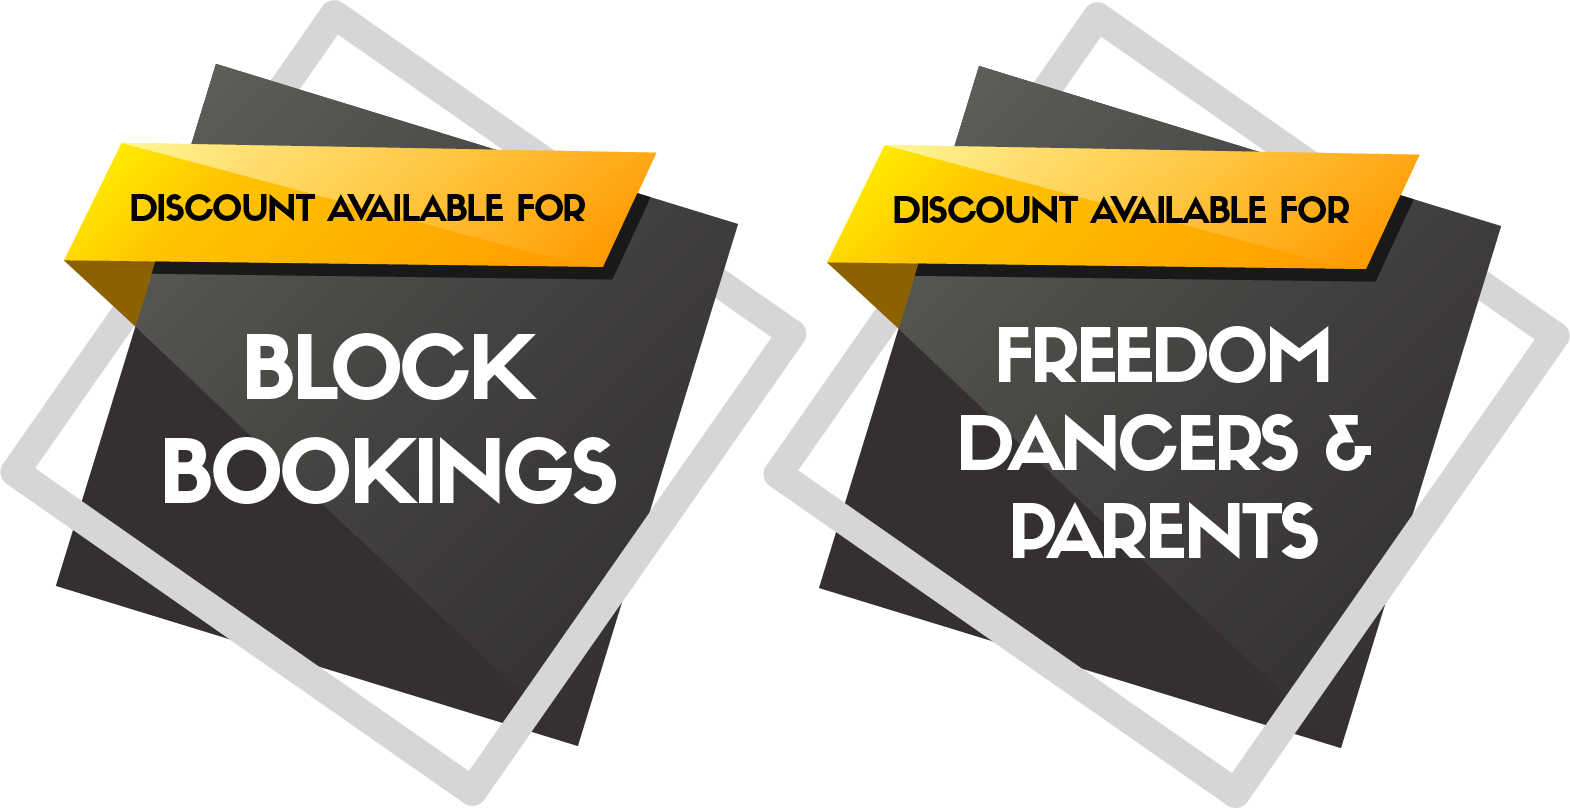 Discount available for block bookings and freedom dances and parents